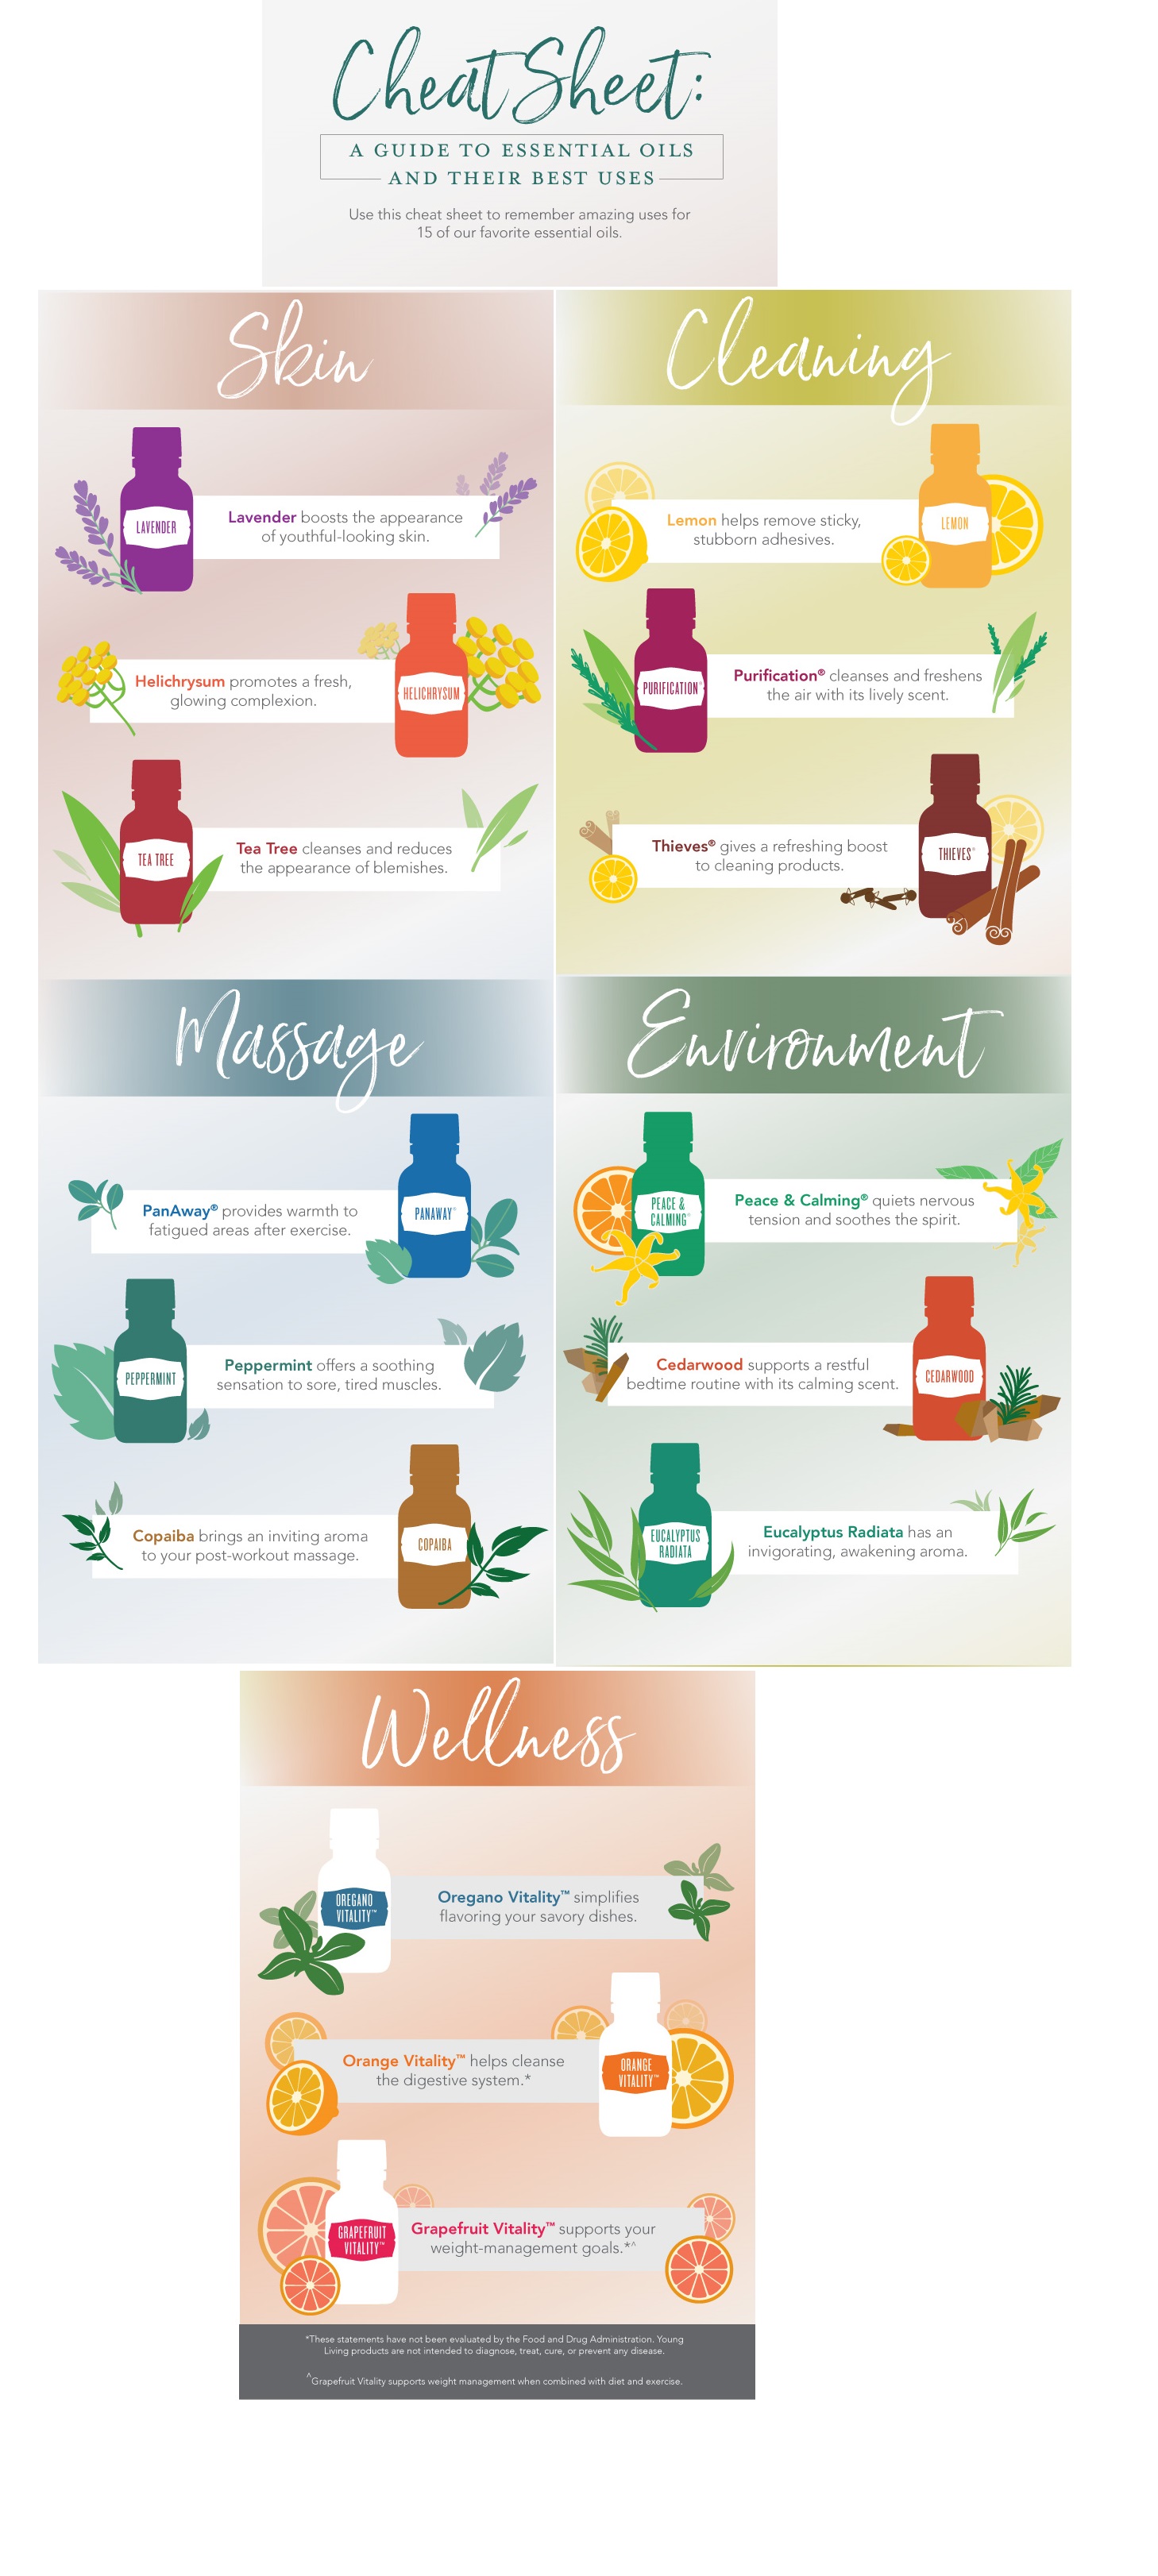 Cheat sheet: A guide to essential oils and their best uses